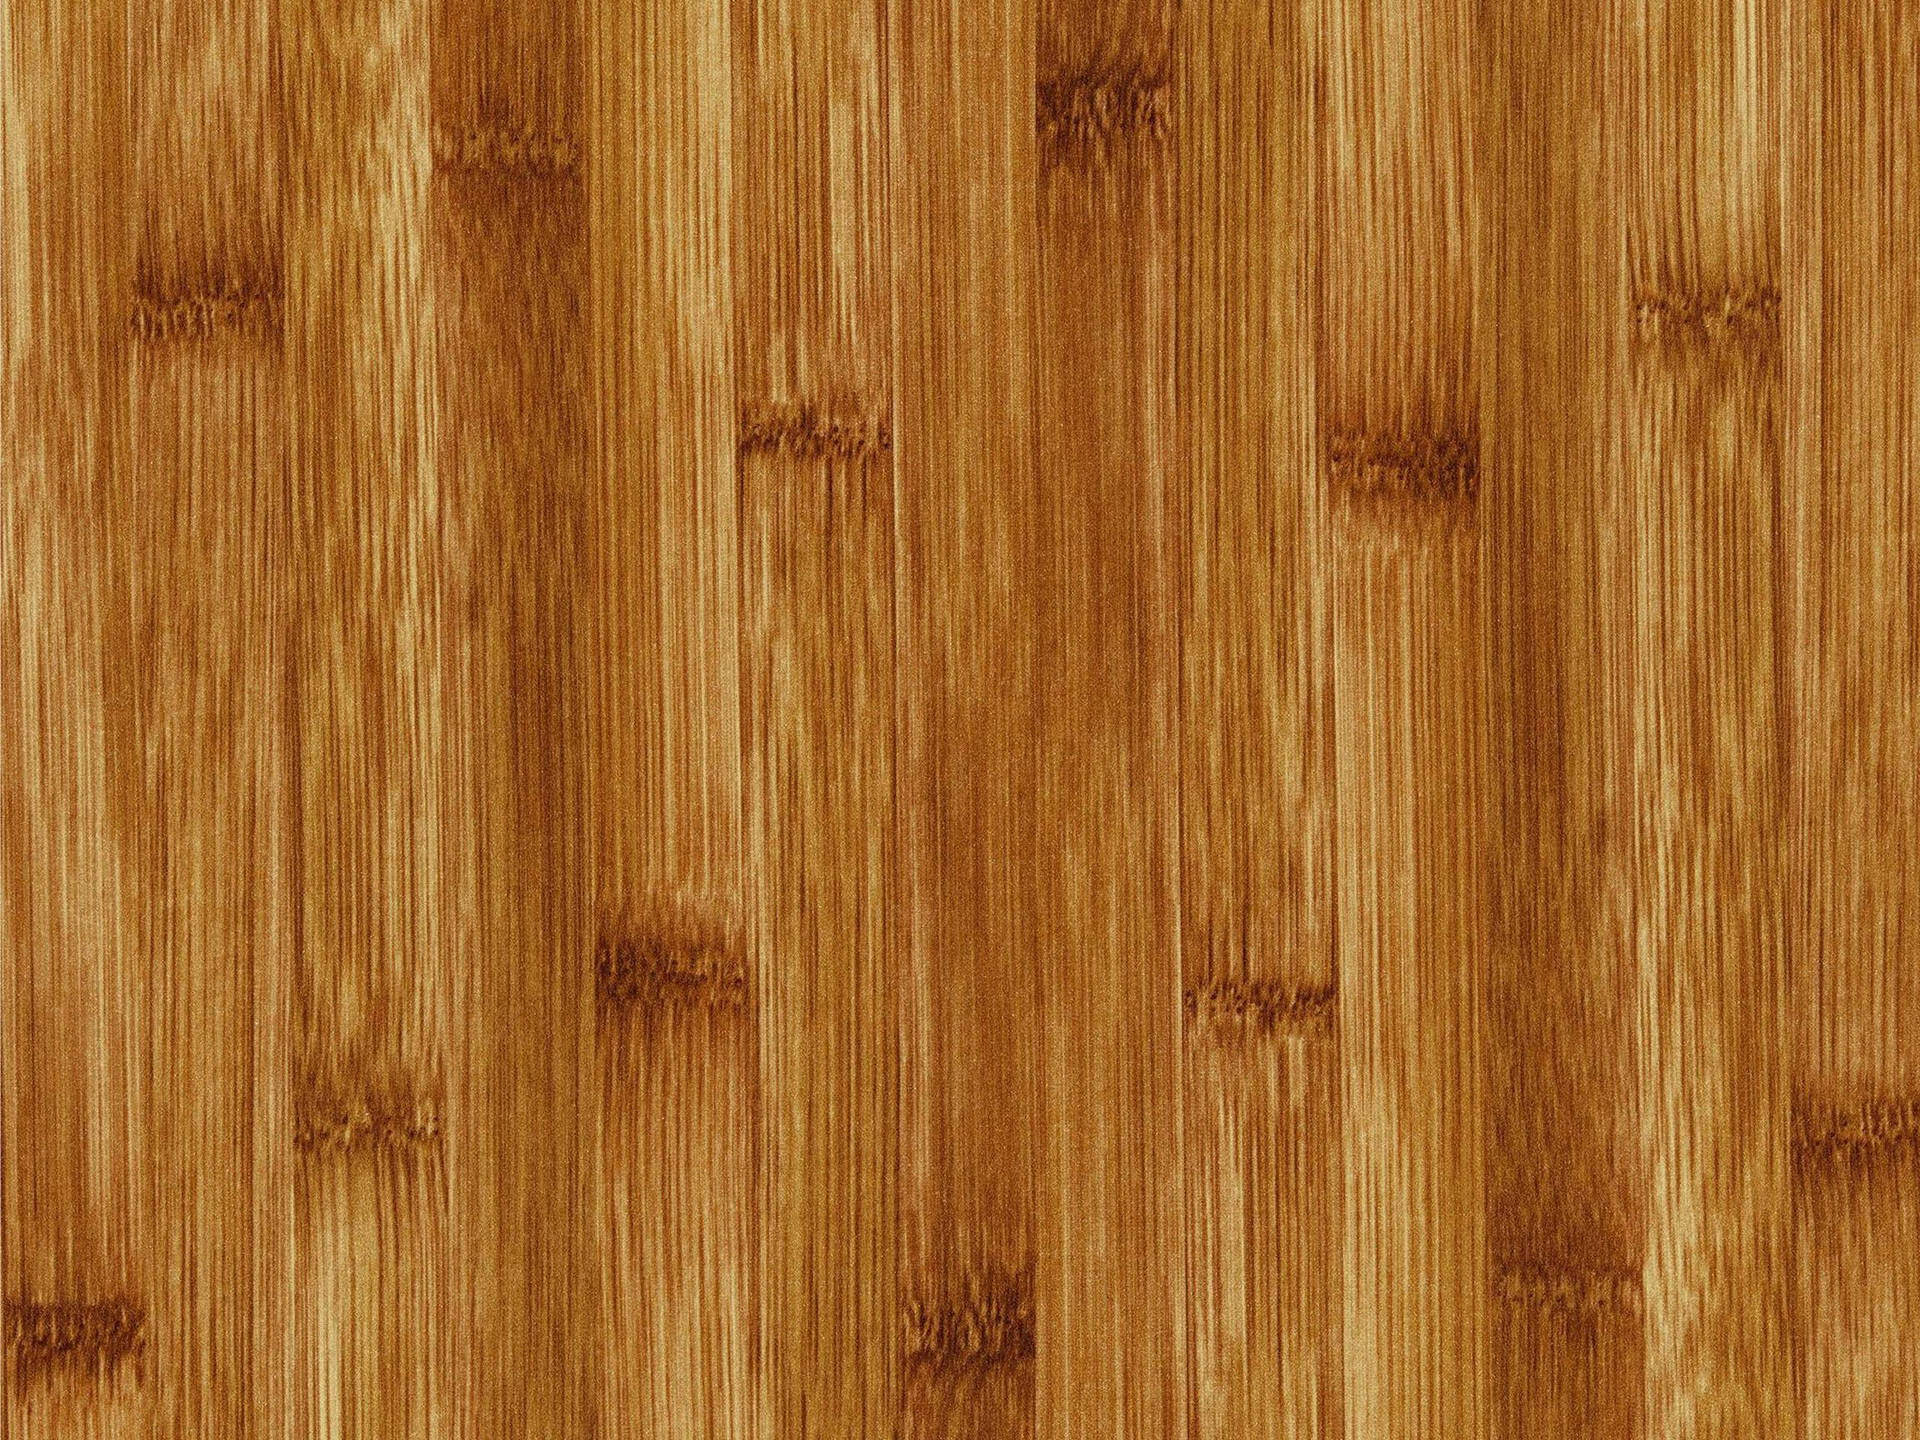 Wood 2304X1728 Wallpaper and Background Image